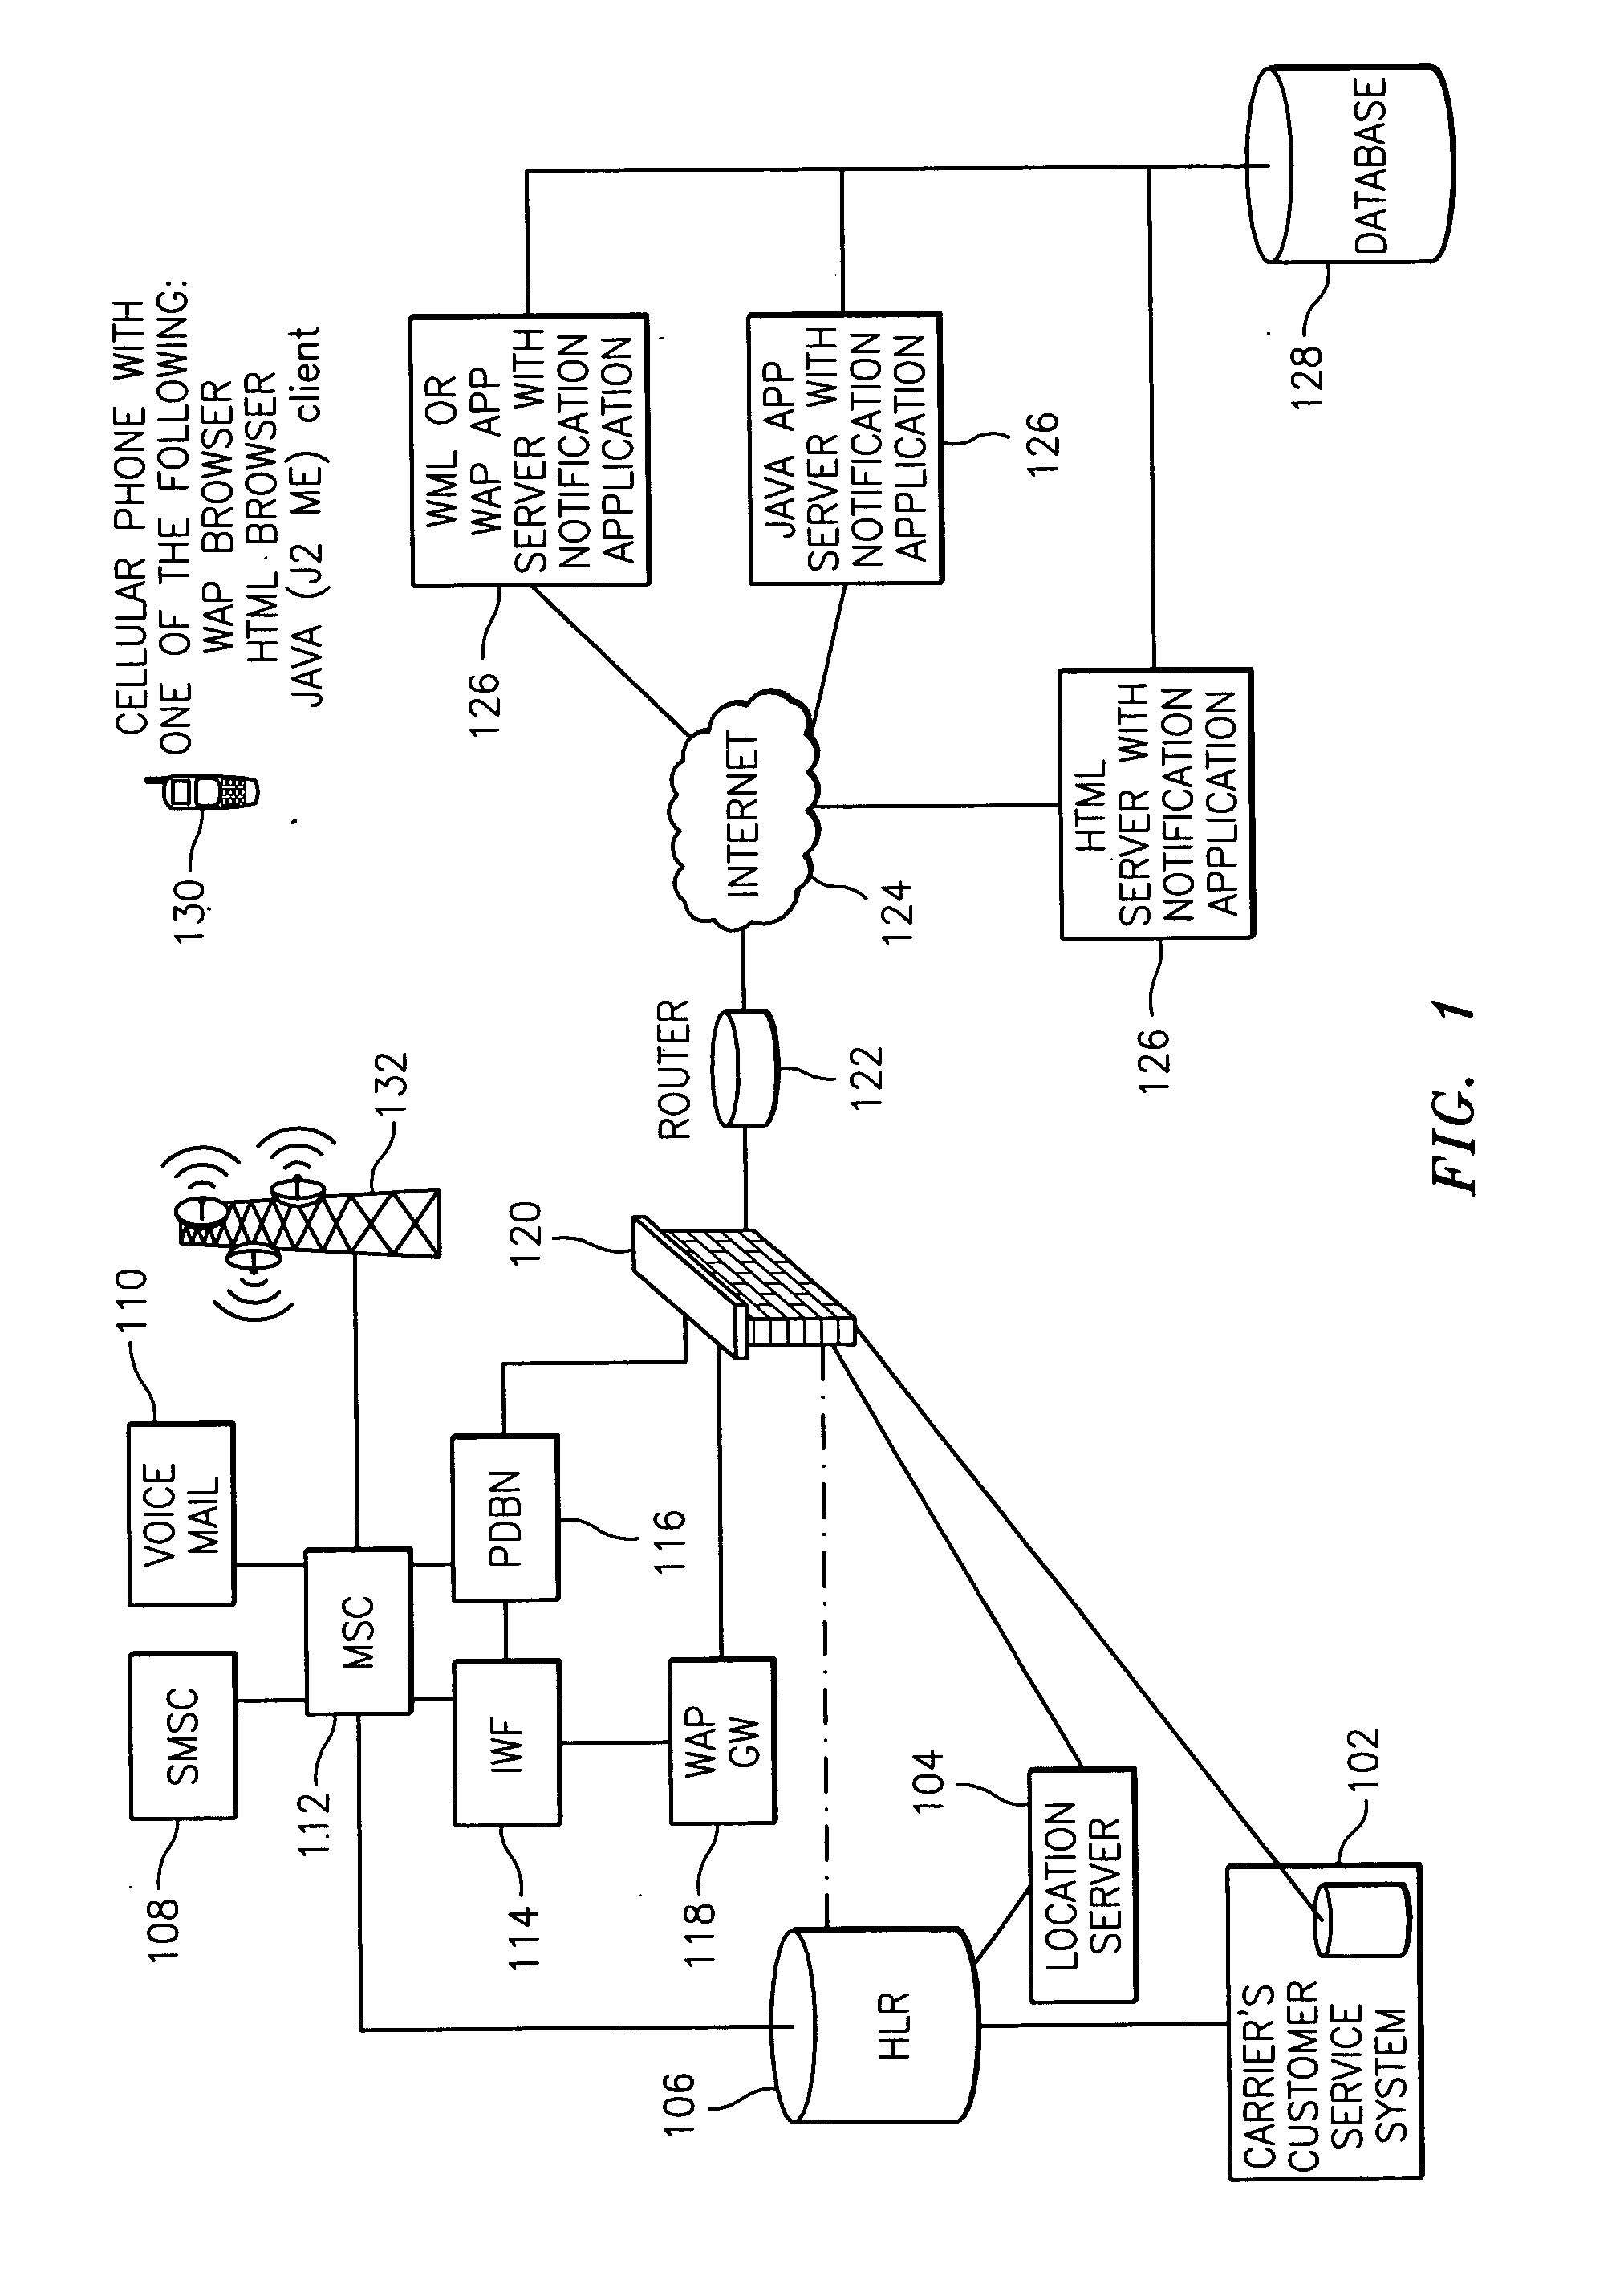 Methods, systems and computer products for notification to a remote party of mobile party presence status change